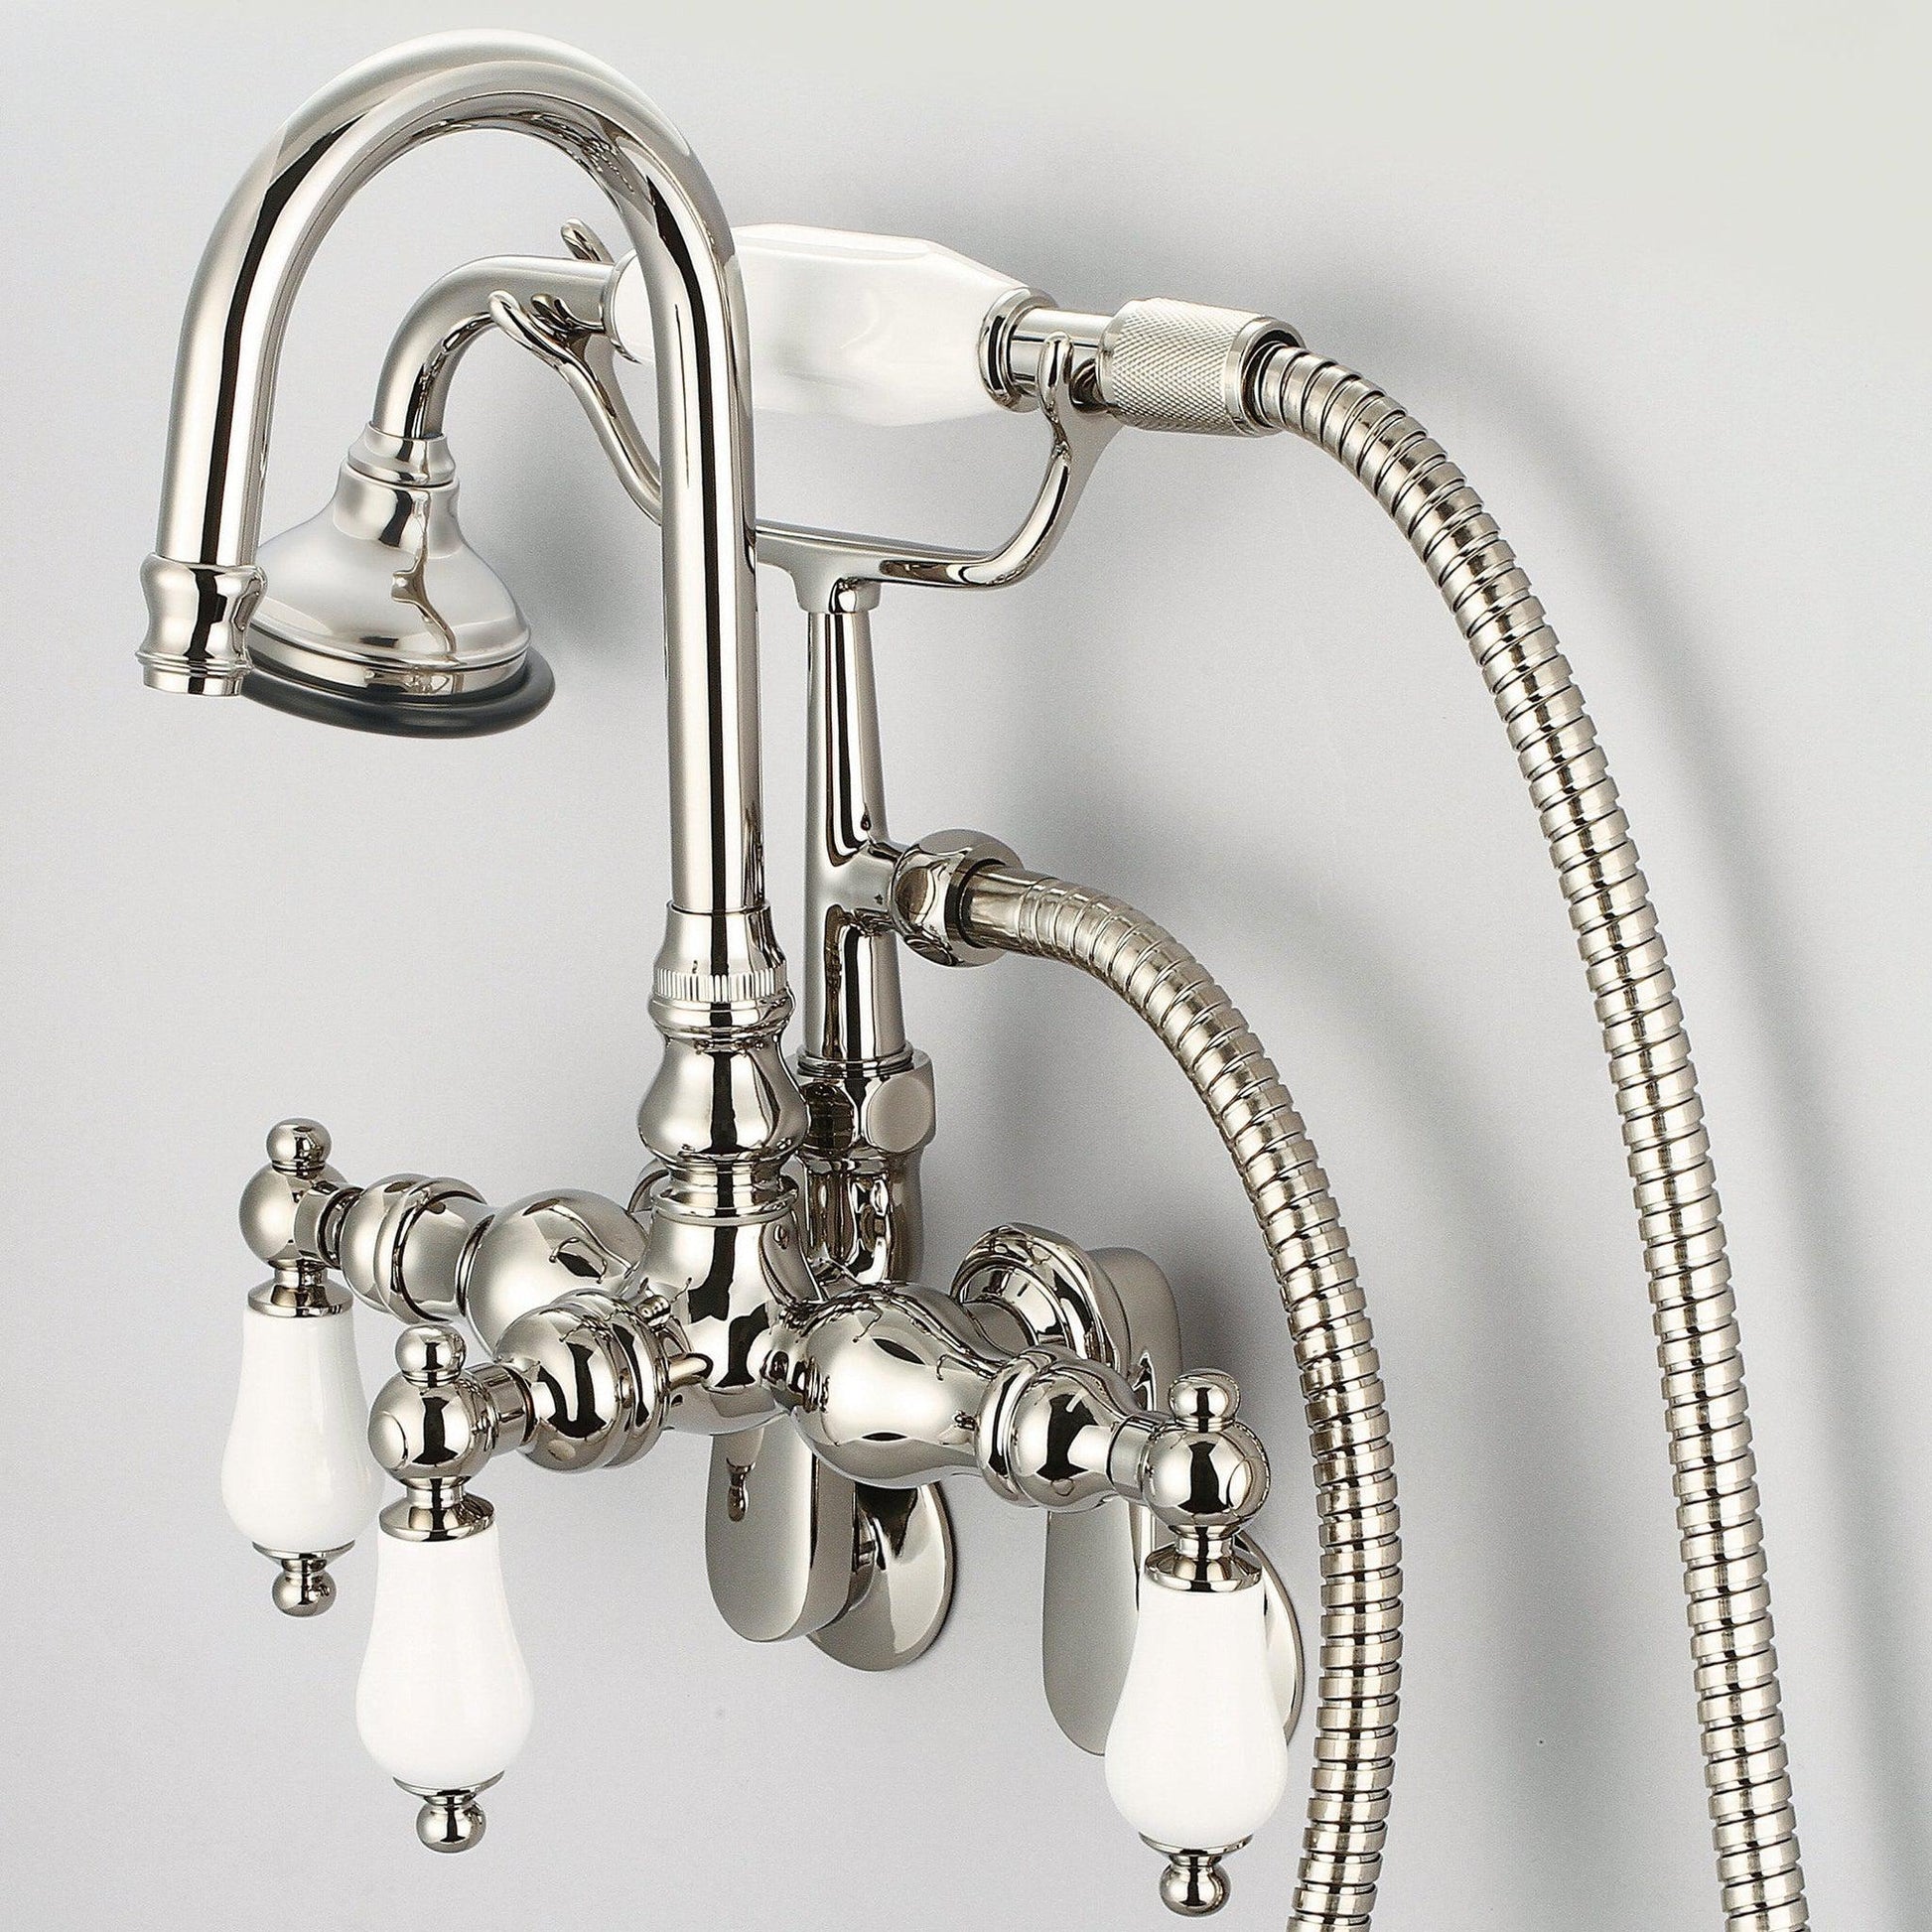 Water Creation Vintage Classic Adjustable Spread Wall Mount Tub F6-0011 9.25" Ivory Solid Brass Faucet With Gooseneck Spout, Swivel Wall Connector And Handheld Shower And Porcelain Lever Handles Without Labels